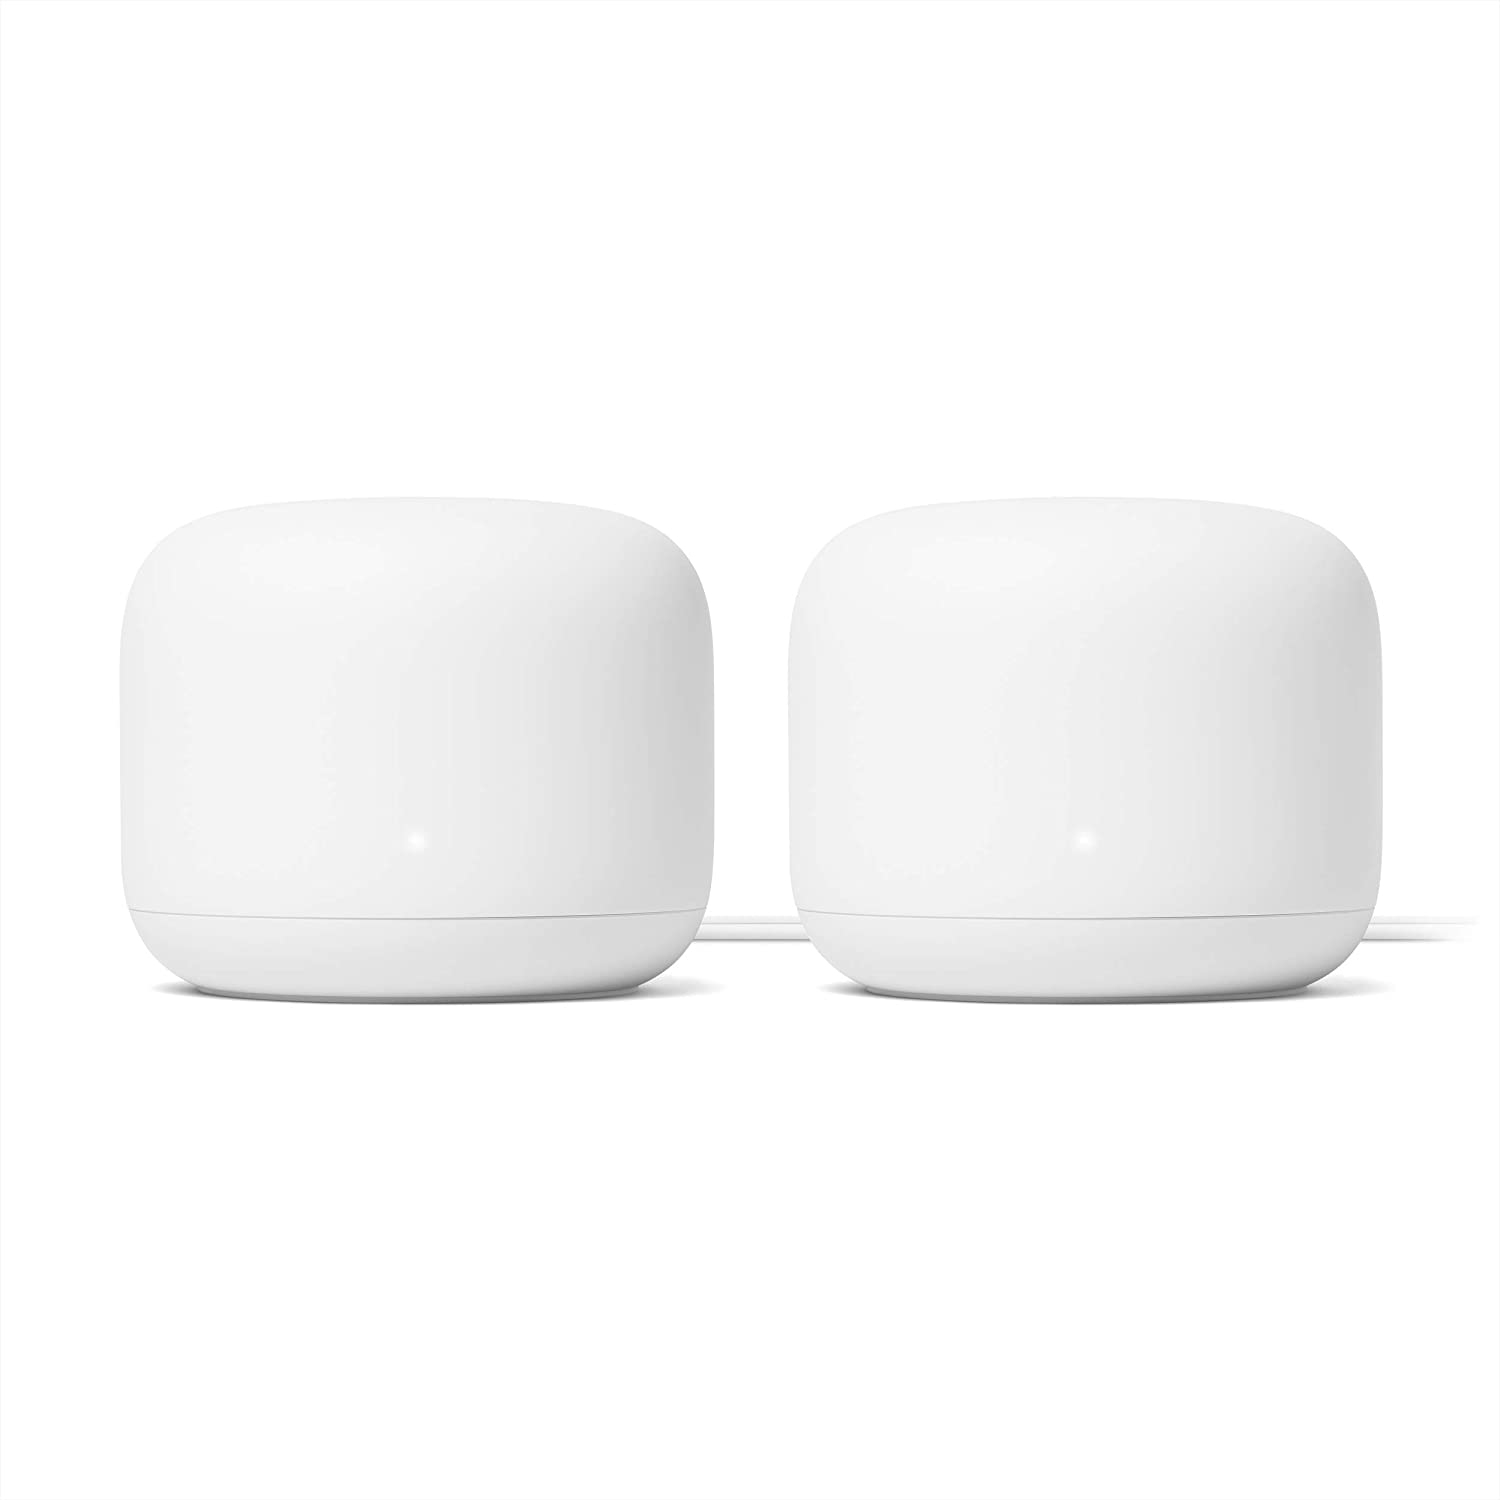 Google Nest WiFi - Home Wi-Fi System - Wi-Fi Extender - Mesh Router for Wireless Internet AC2200 GA00595-US- 2 Pack